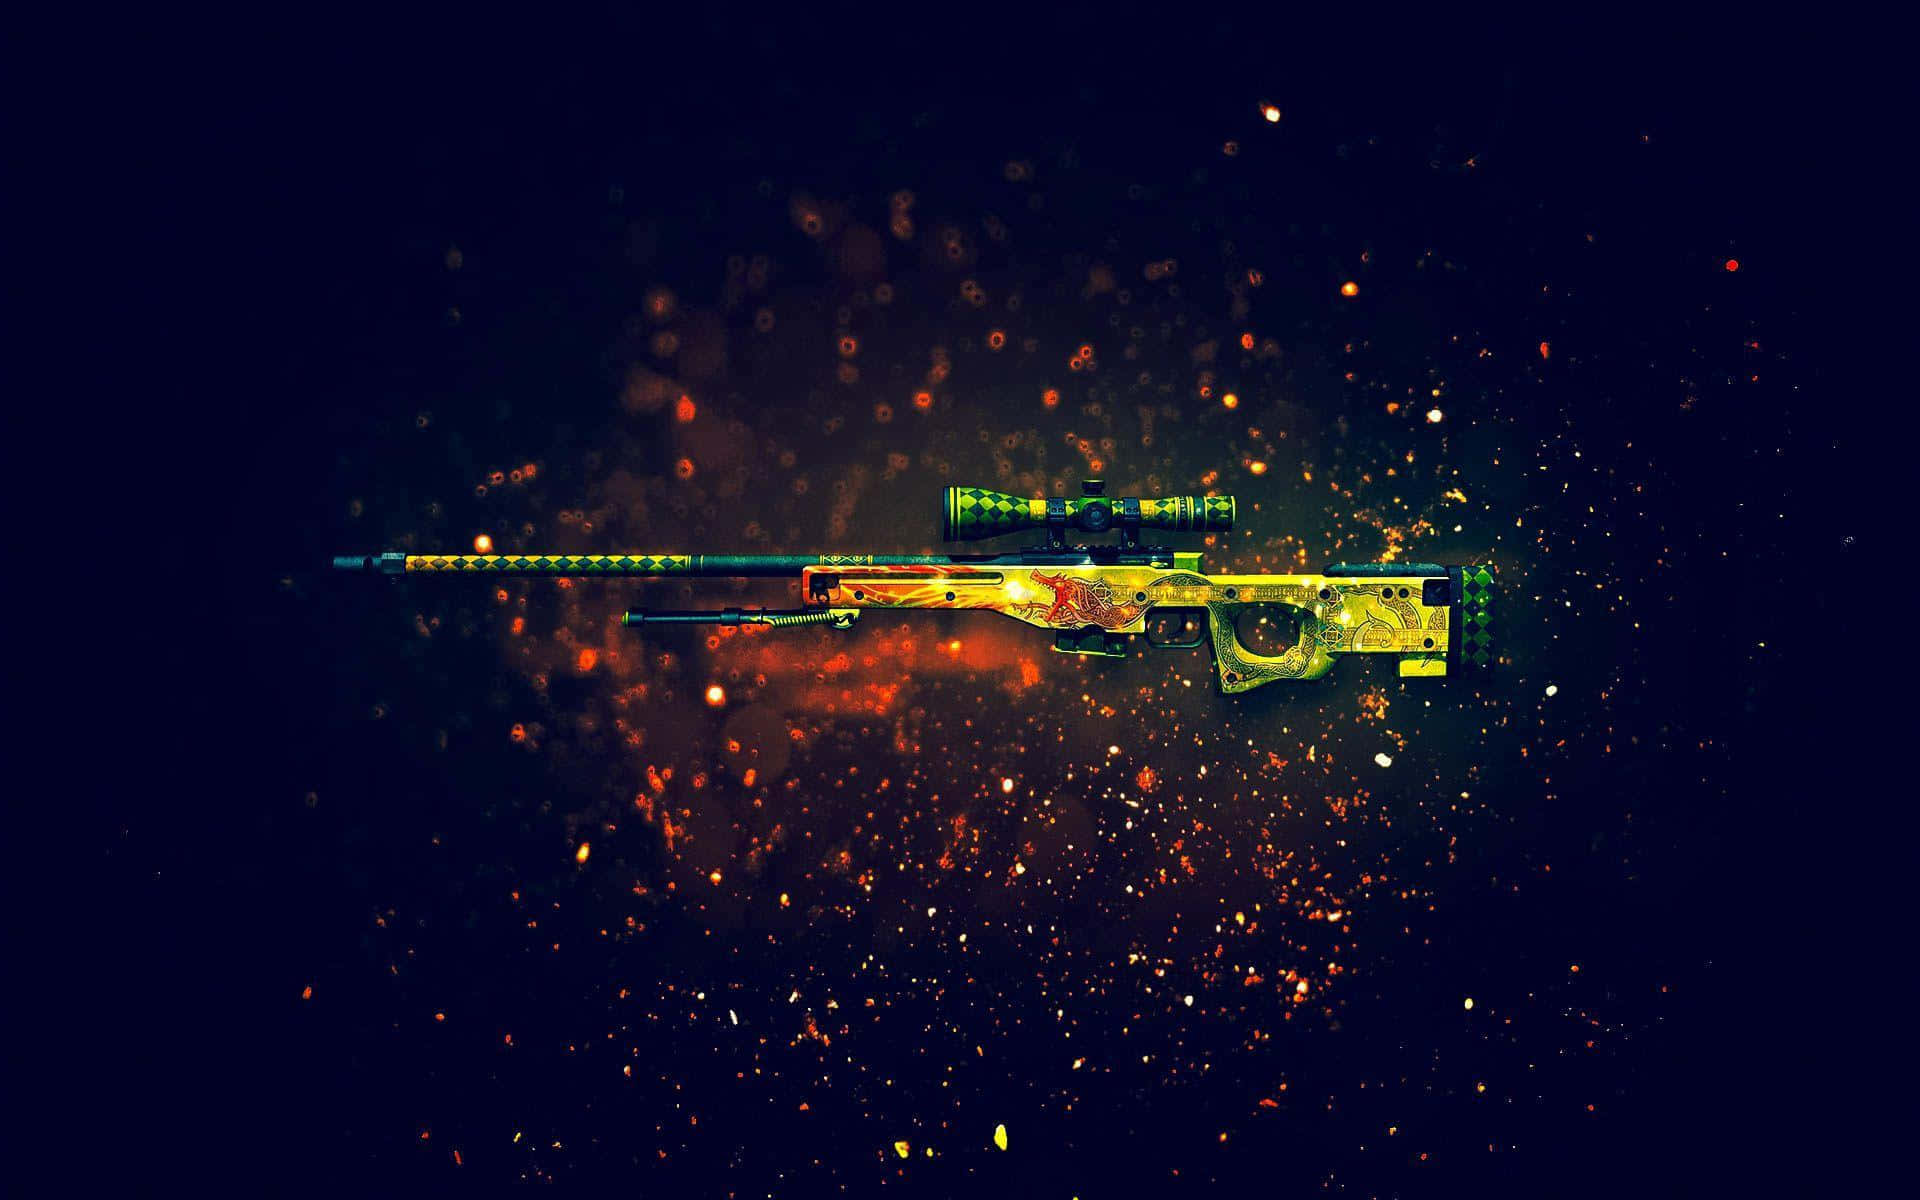 Counterstrikeawp Sniper - Please Clarify Whether This Is A Title, A Description Or A Command So I Can Provide An Accurate Translation. Wallpaper